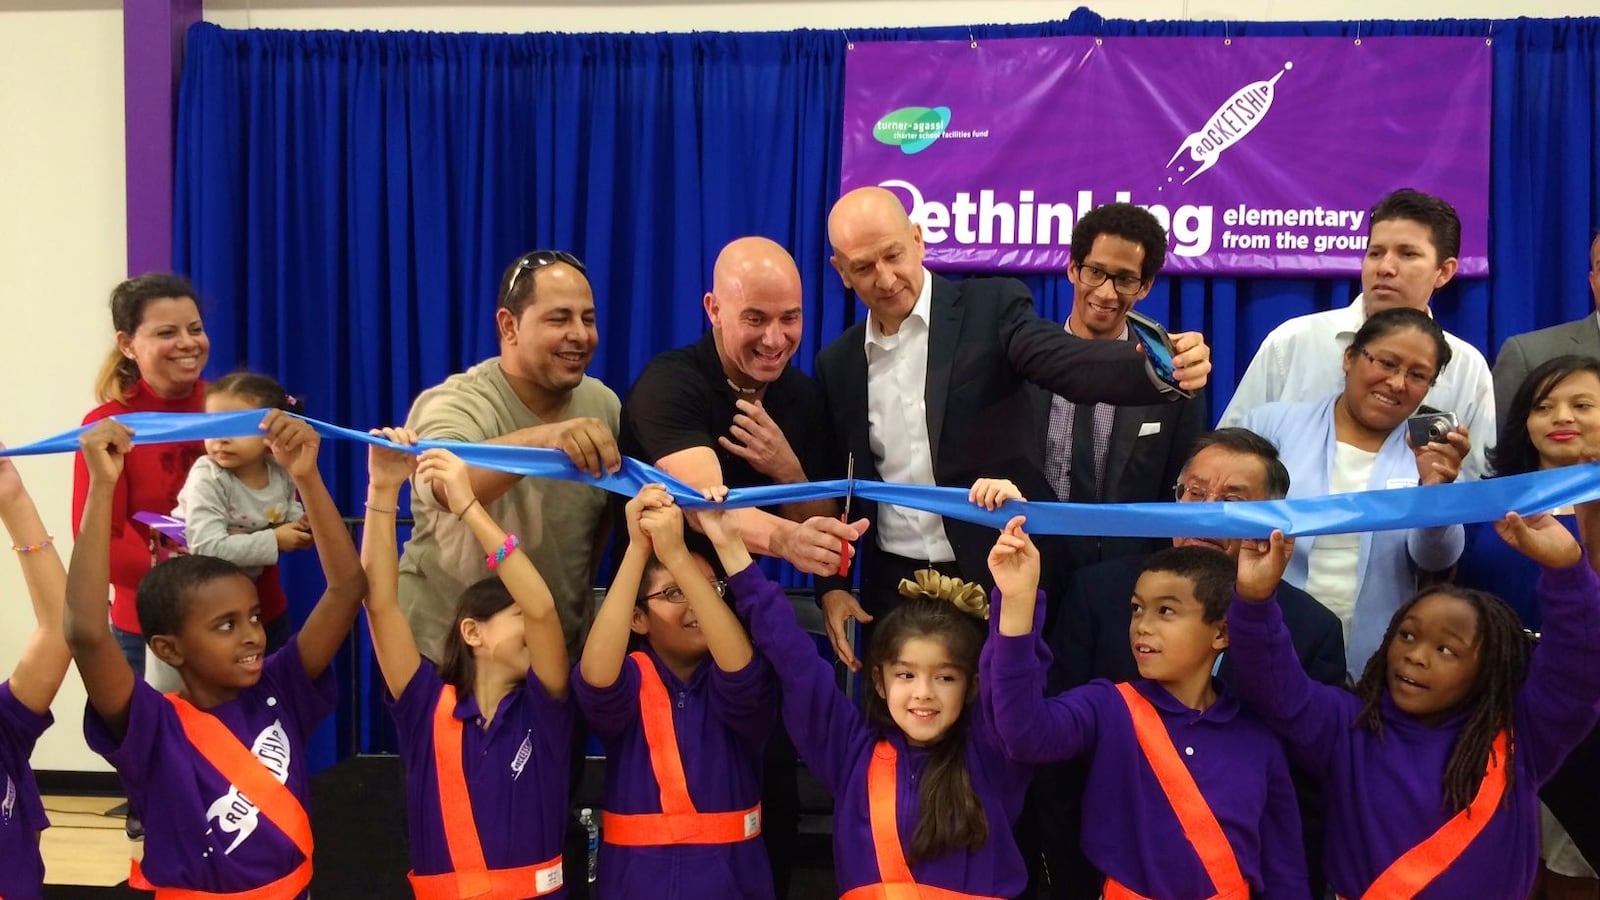 Tennis great Andre Agassi cuts the ribbon as business partner Bobby Turner watches during the official opening last October of Rocketship's newest Nashville charter school.